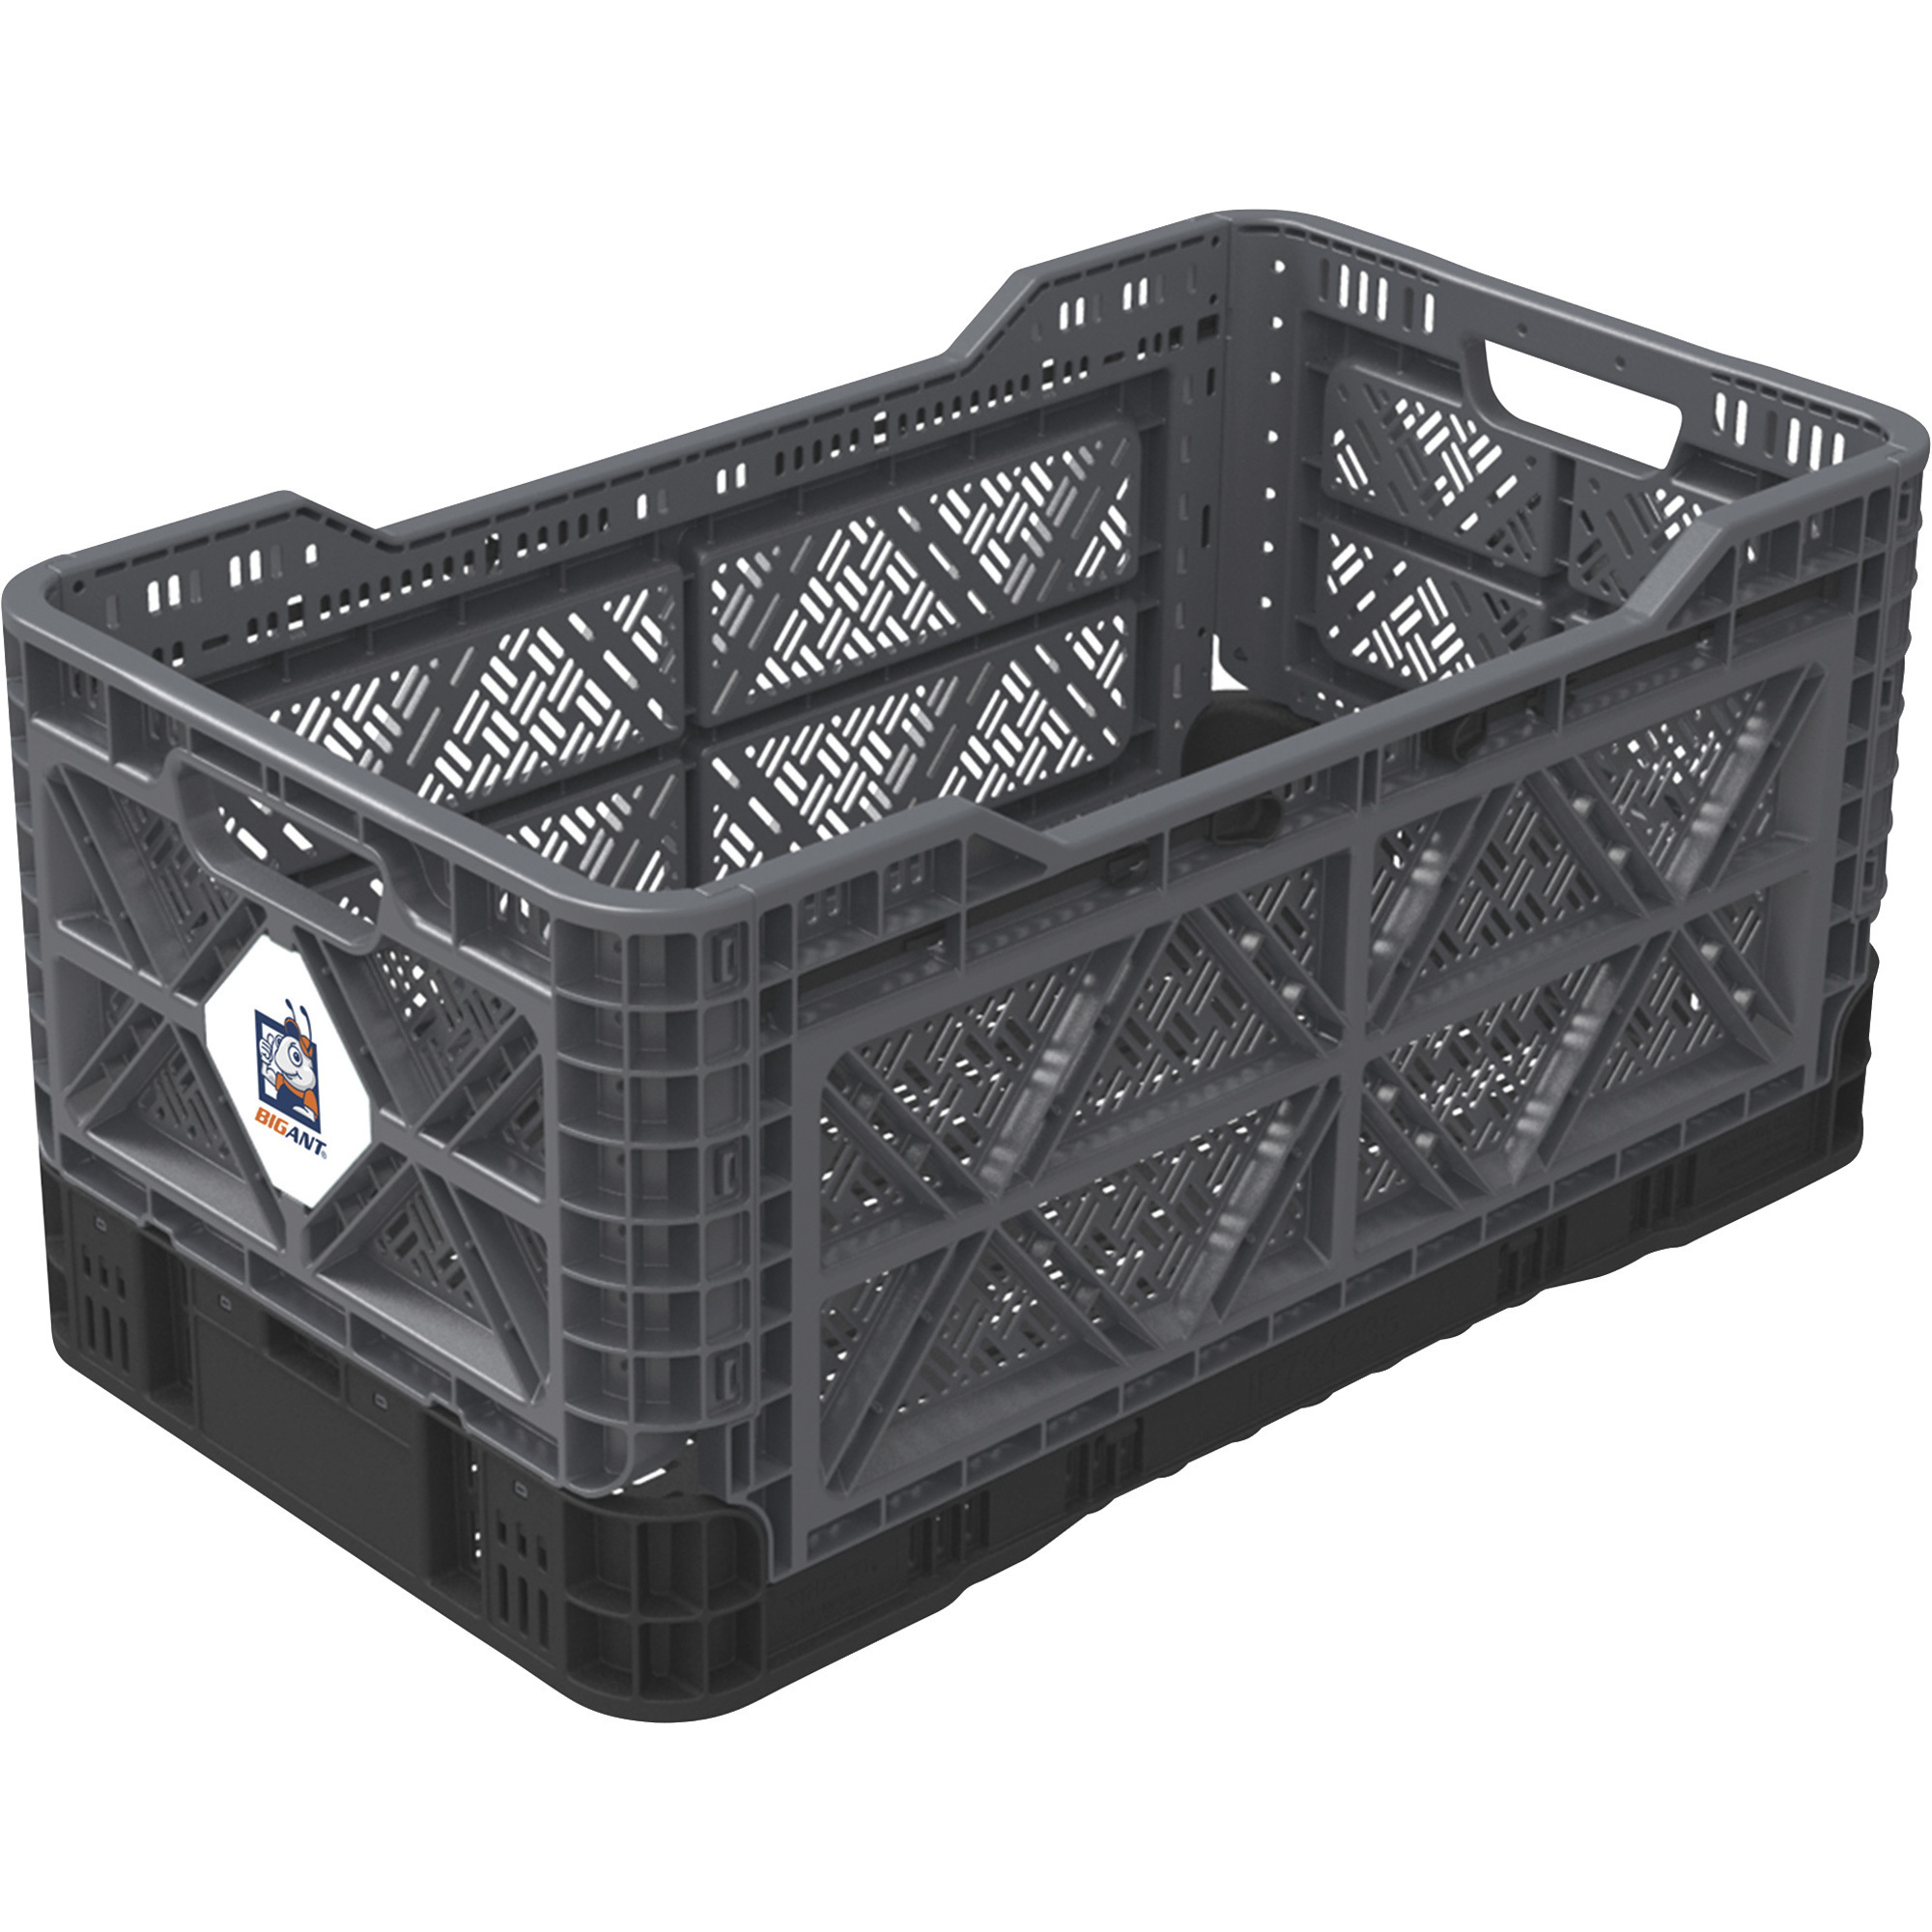 BIG ANT Collapsible Smart Crate â 23.8-Gallon, 265-Lb. Capacity, 16 9/16Inch L x 28 3/4Inch W x 13 3/4Inch H, Model IP734235